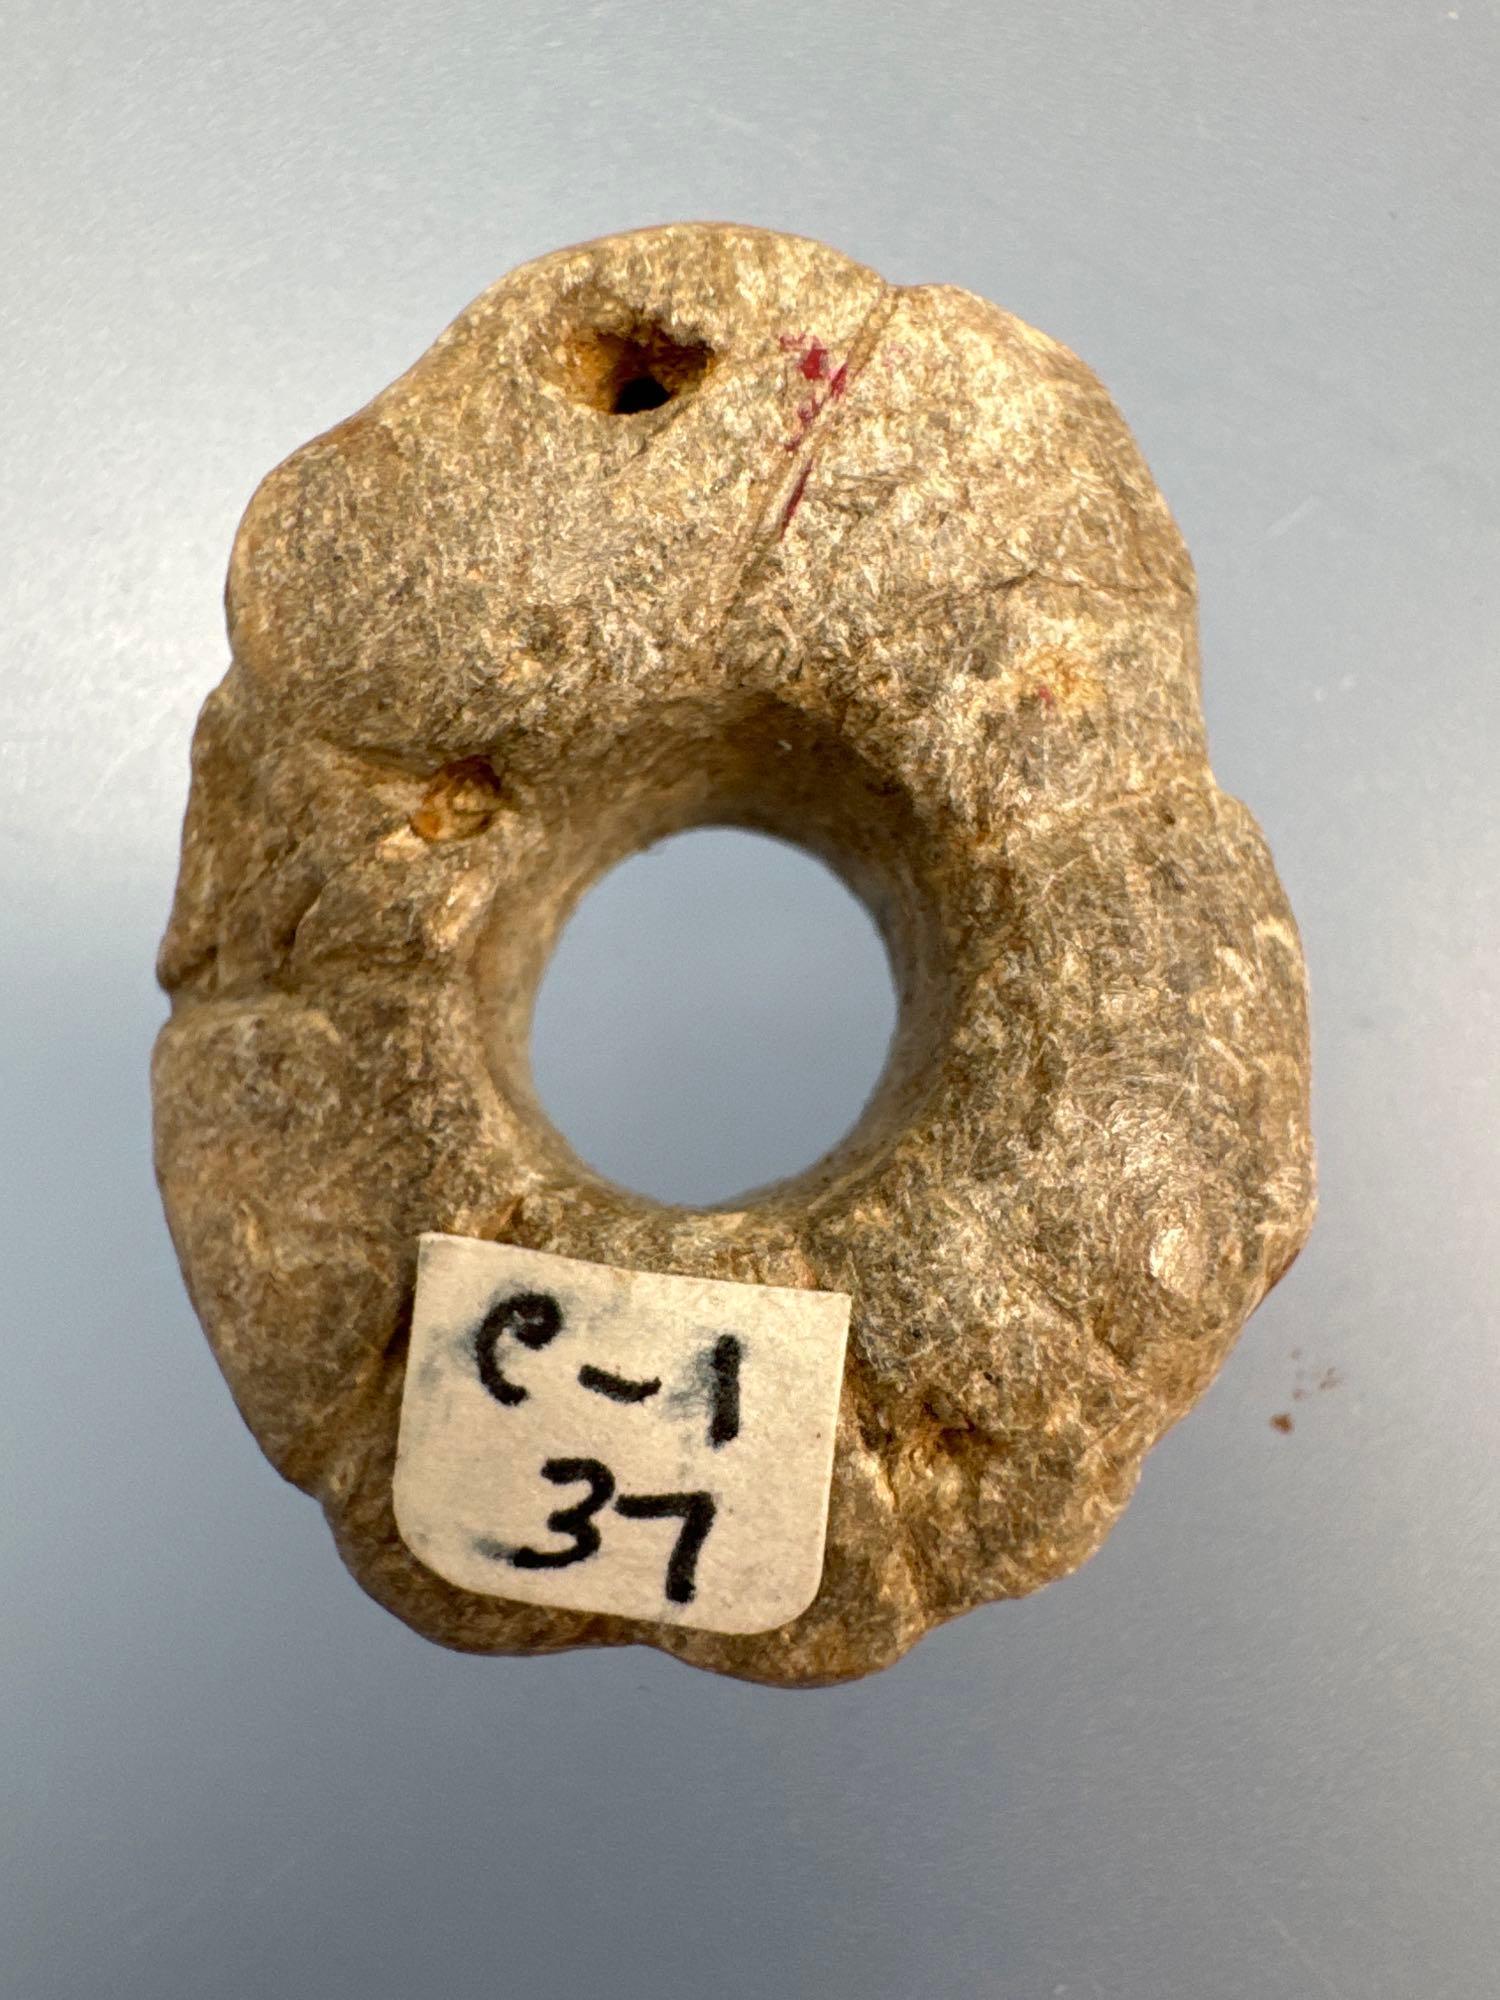 1 1/8" Soapstone Bead w/Incising On Face and Edges,Ex: Clyde Youtz Collection of Newmanstown, PA, Pu